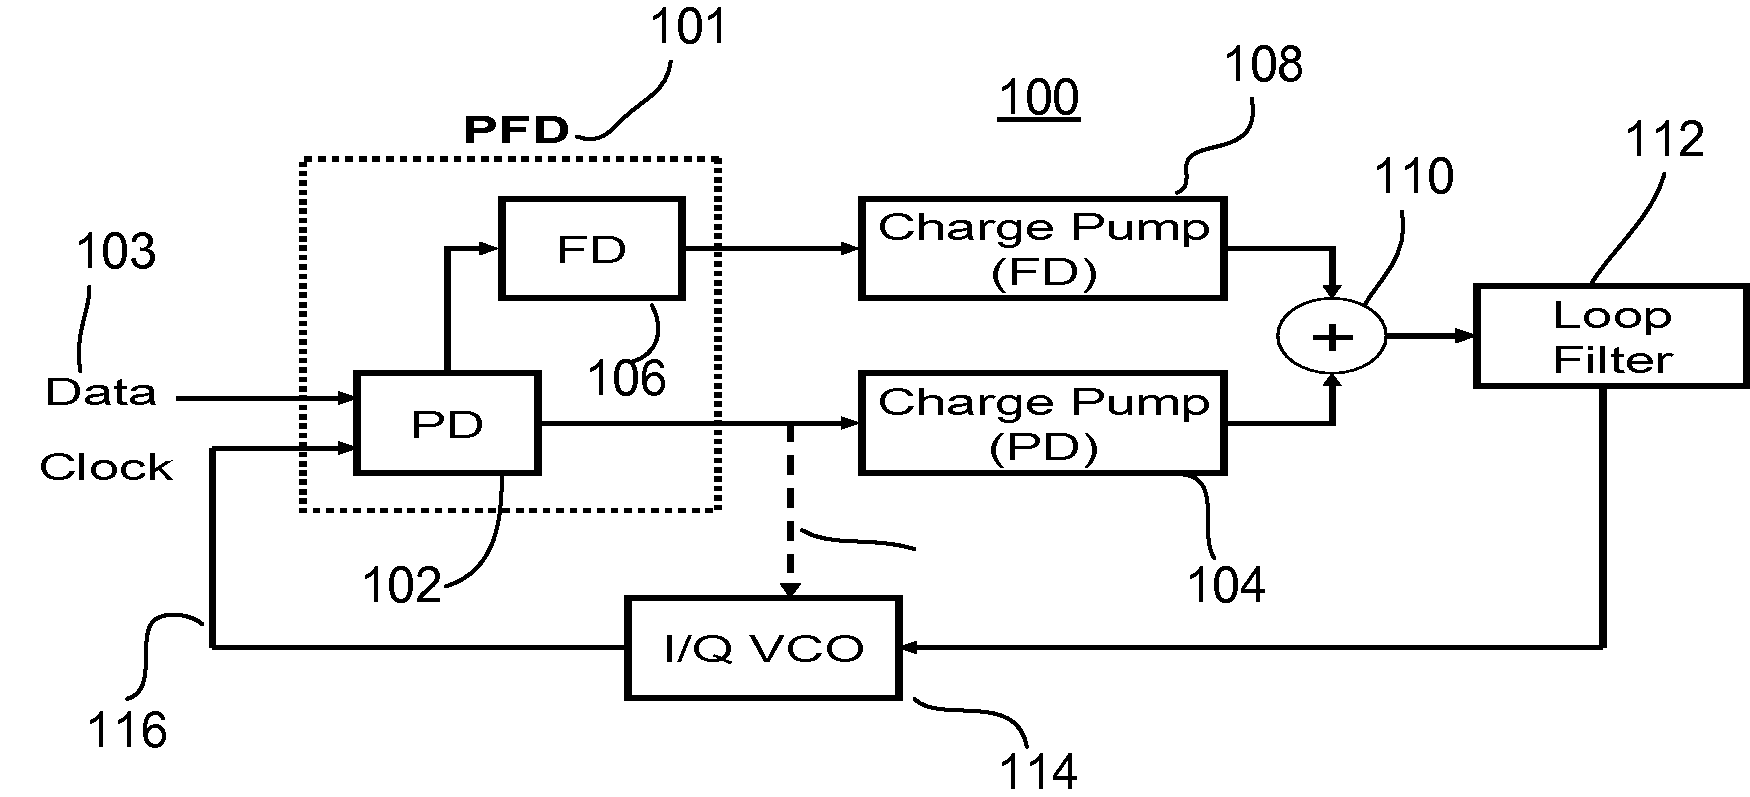 Phase/Frequency Detector and Charge Pump Architecture for Referenceless Clock and Data Recovery (CDR) Applications